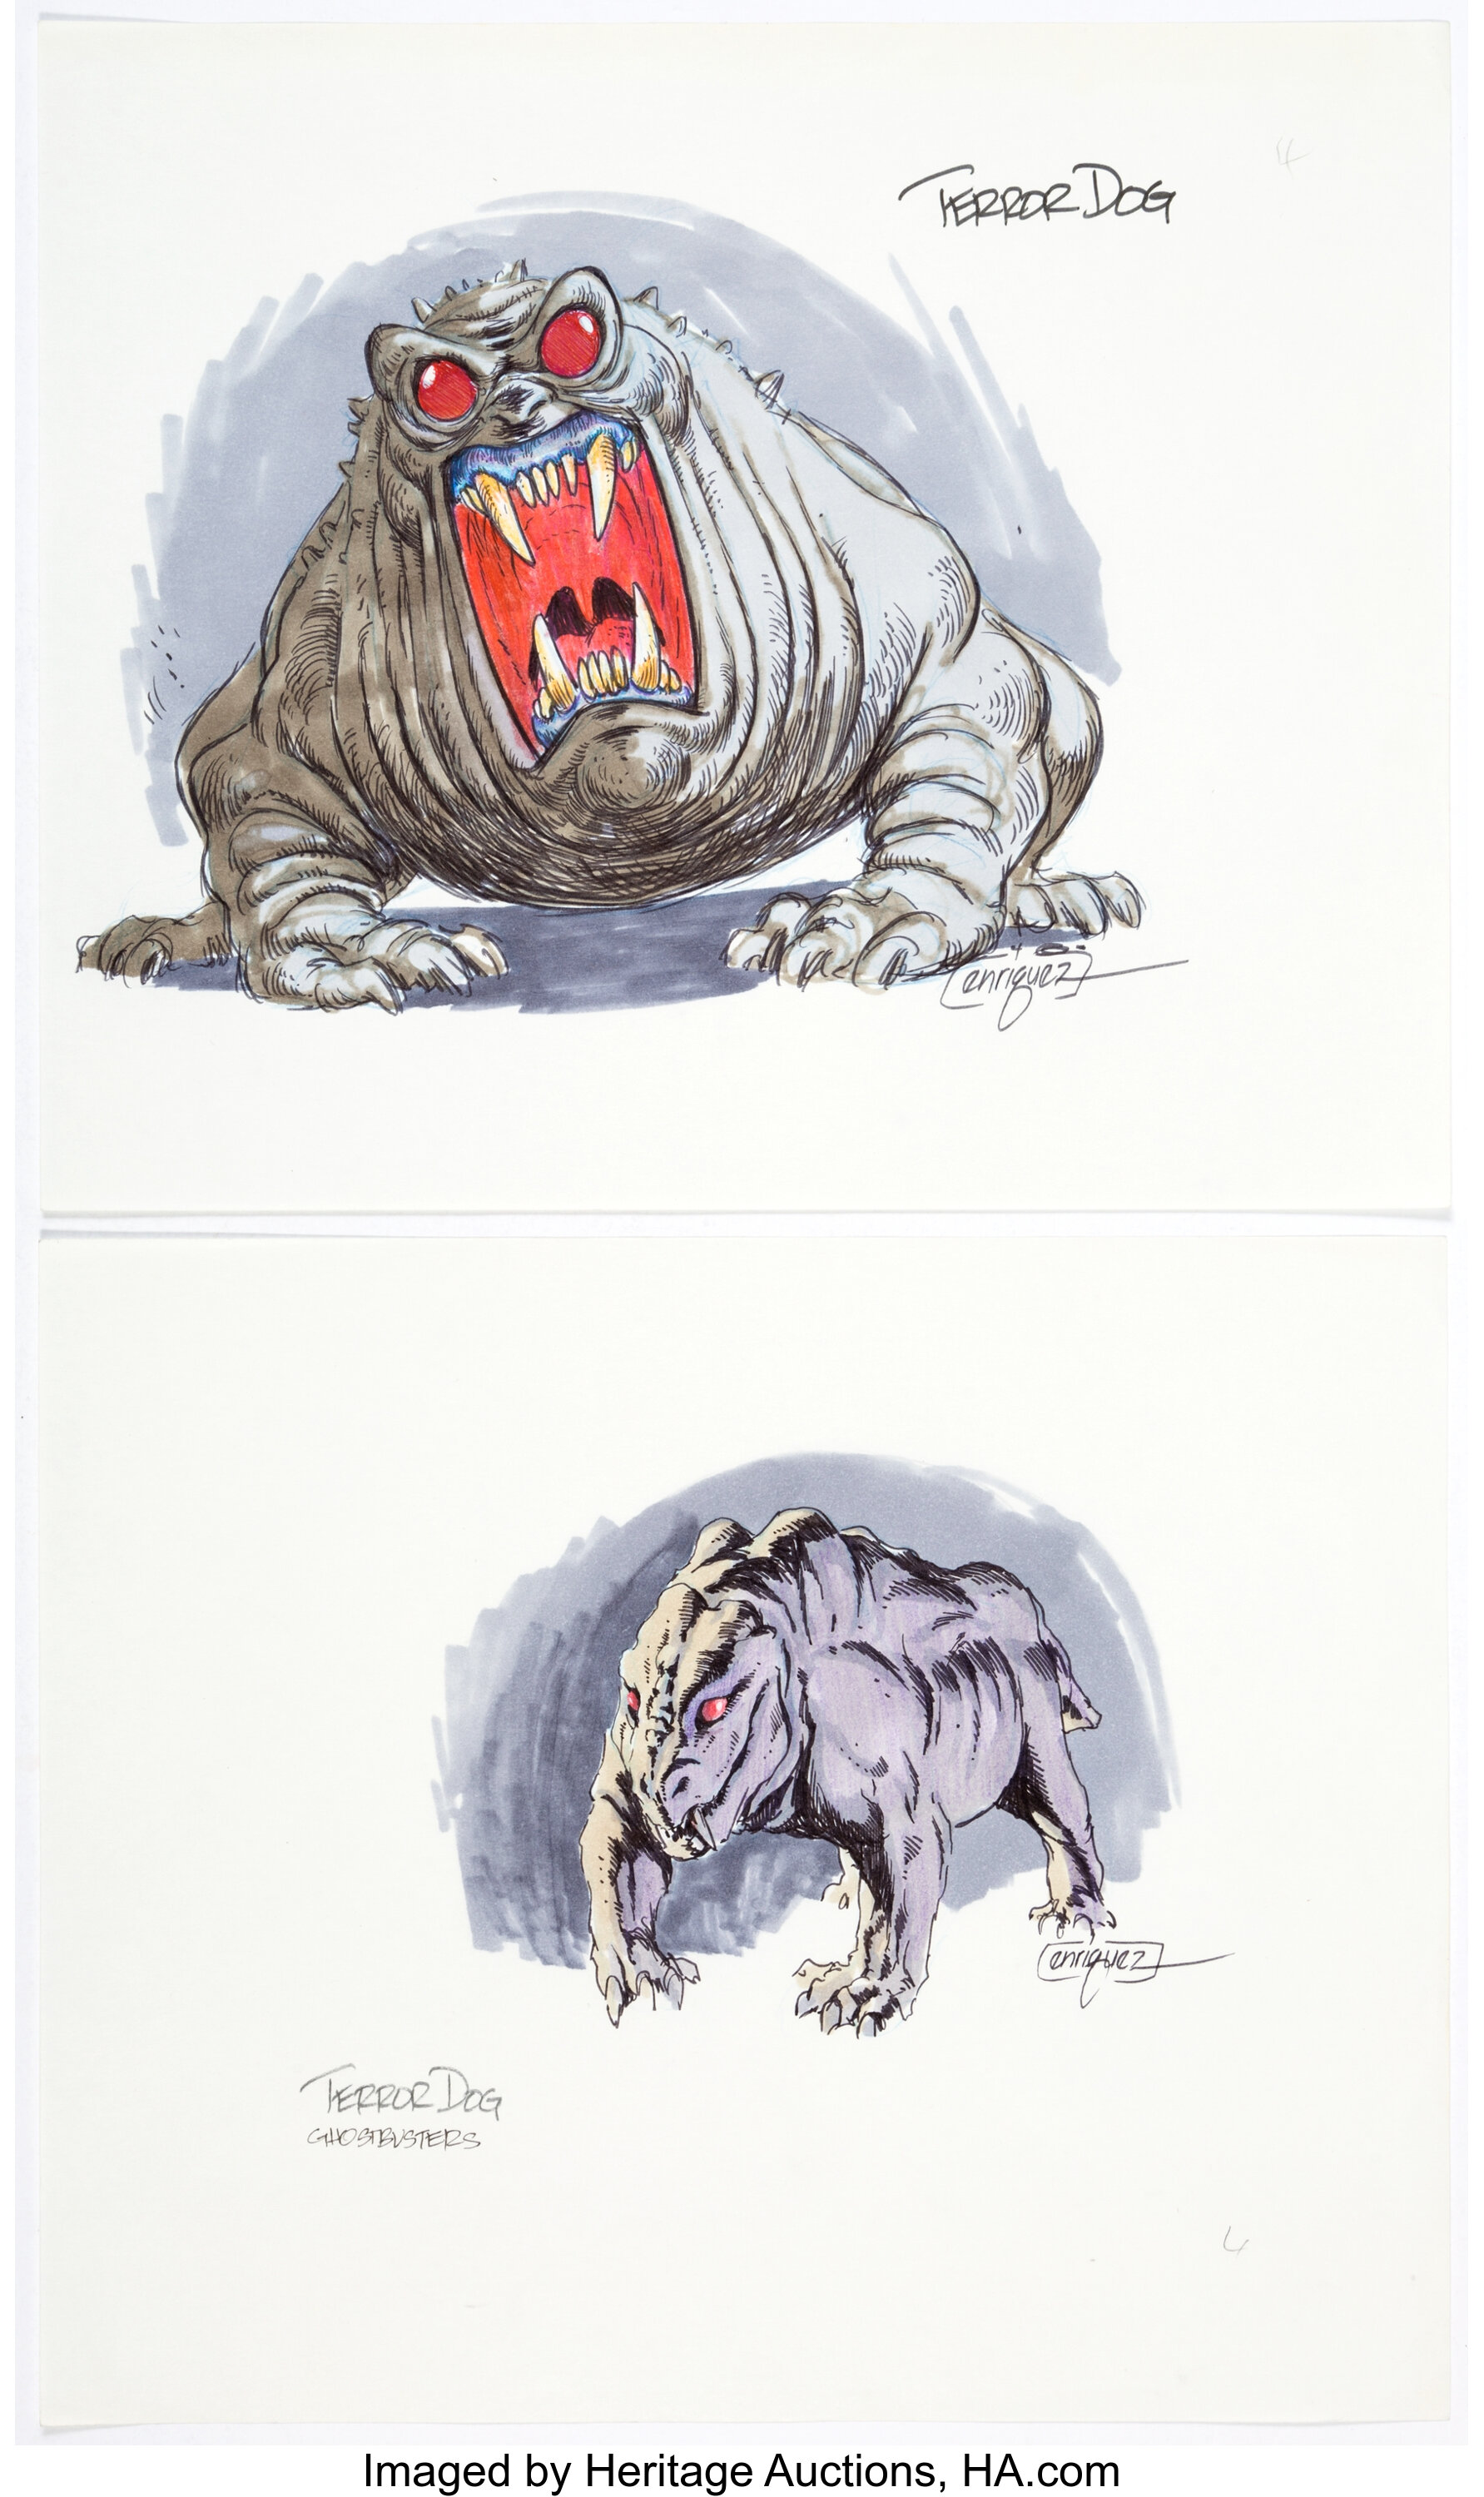 ghostbusters movie concept art